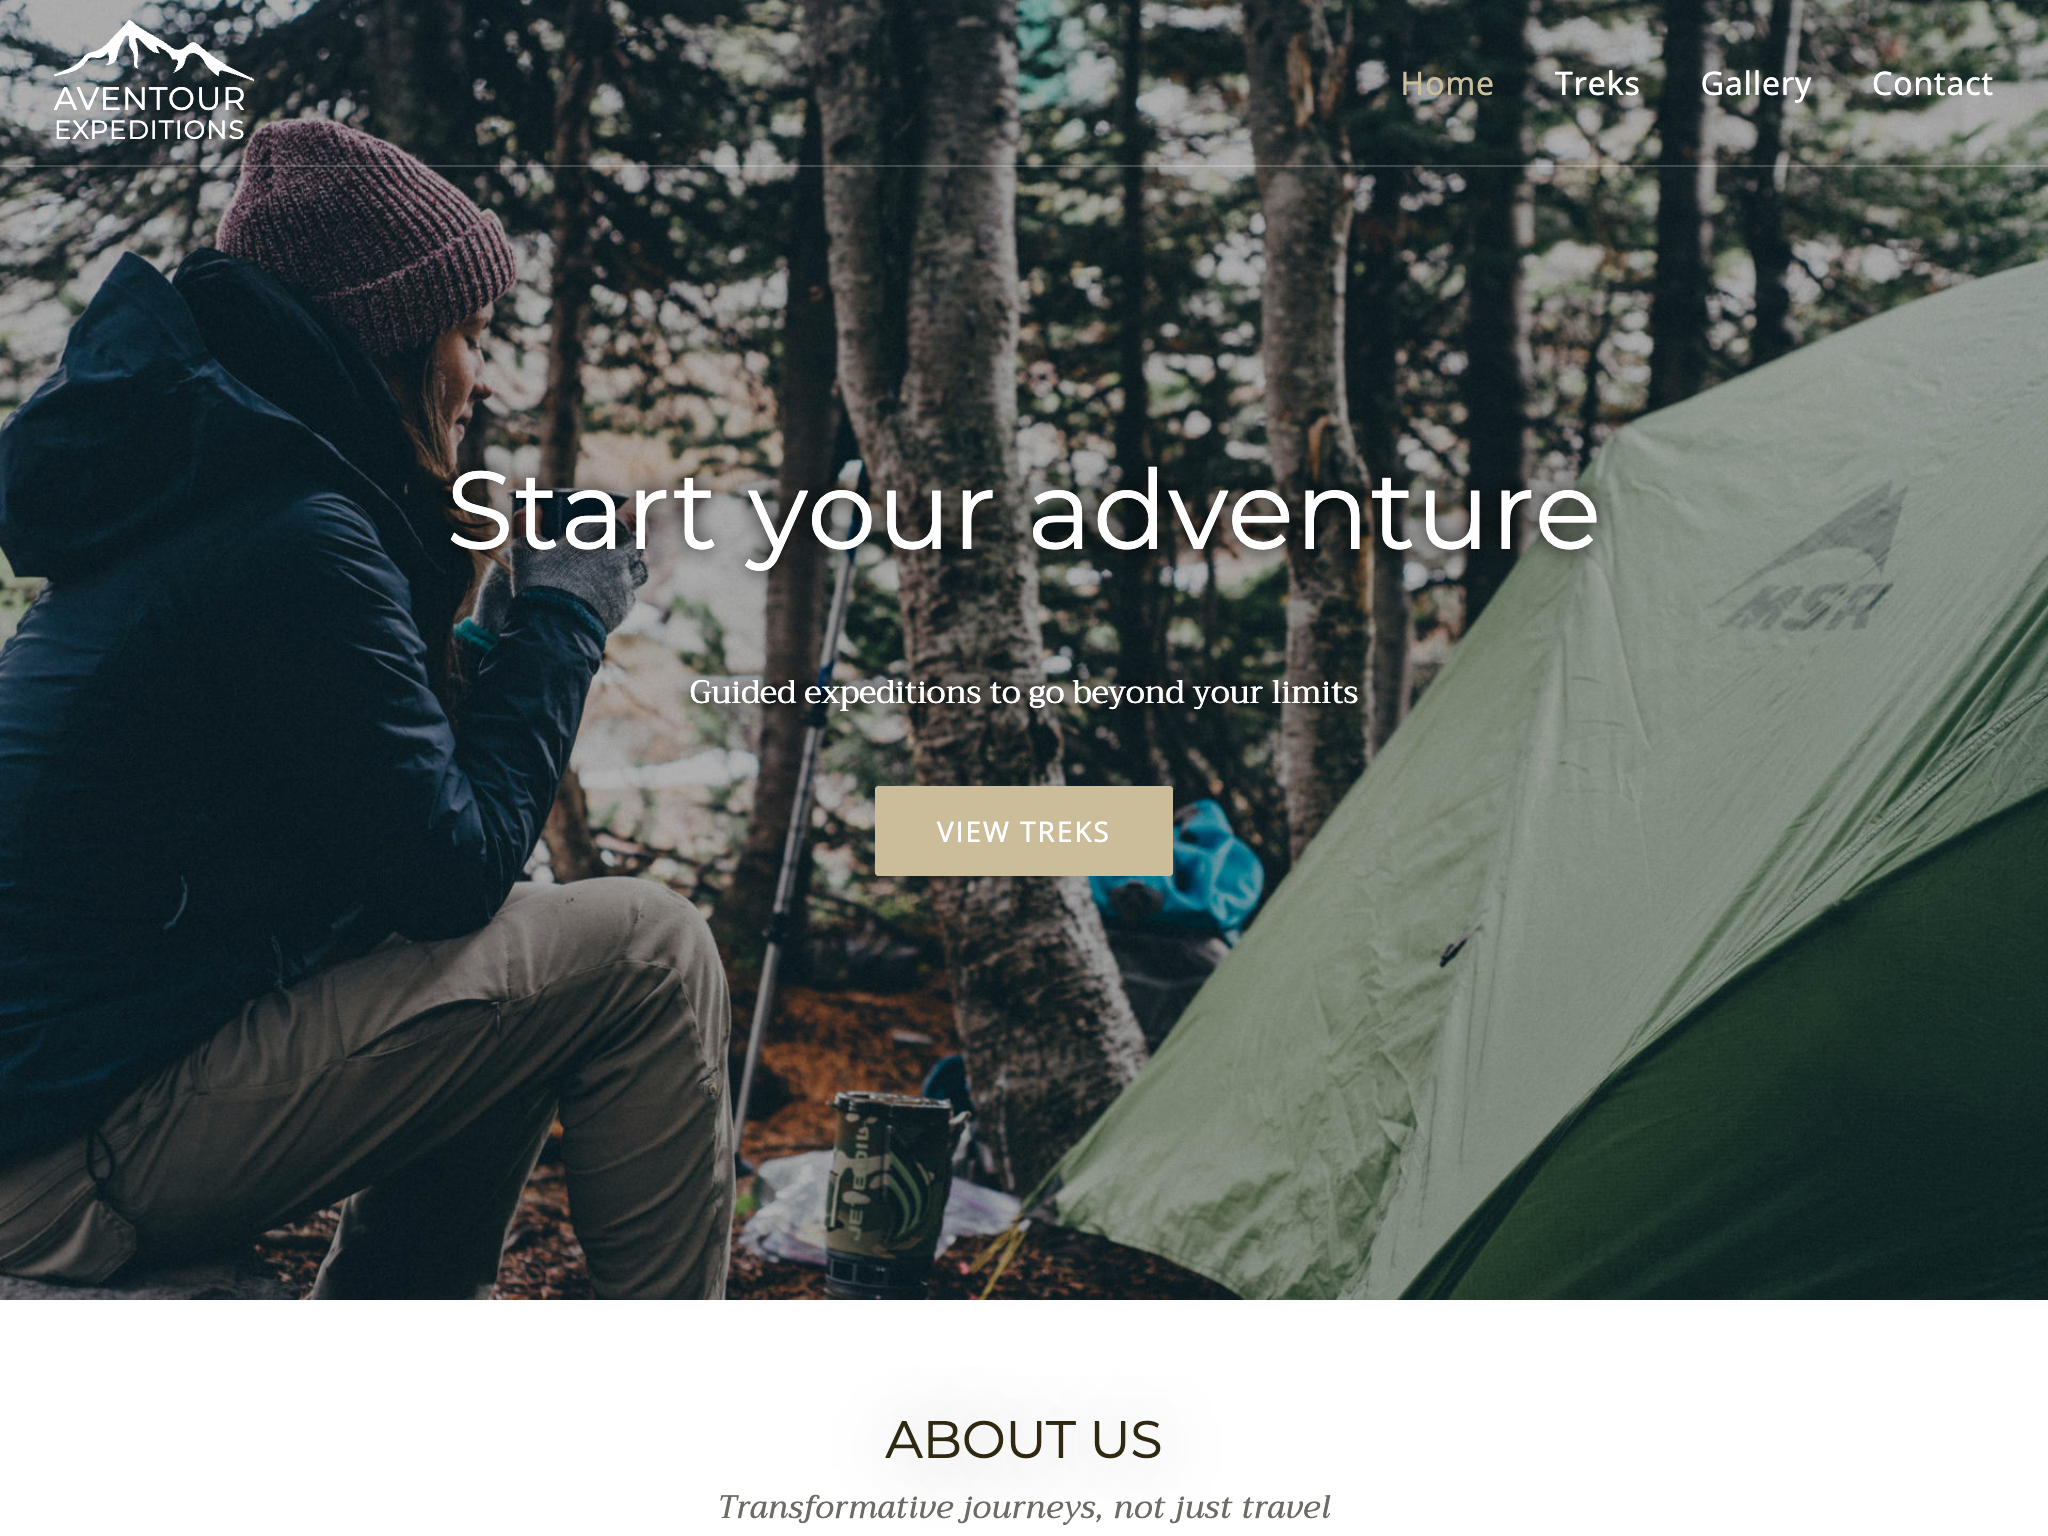 Home page for an outdoor trekking company with tagline "Start your adventure"